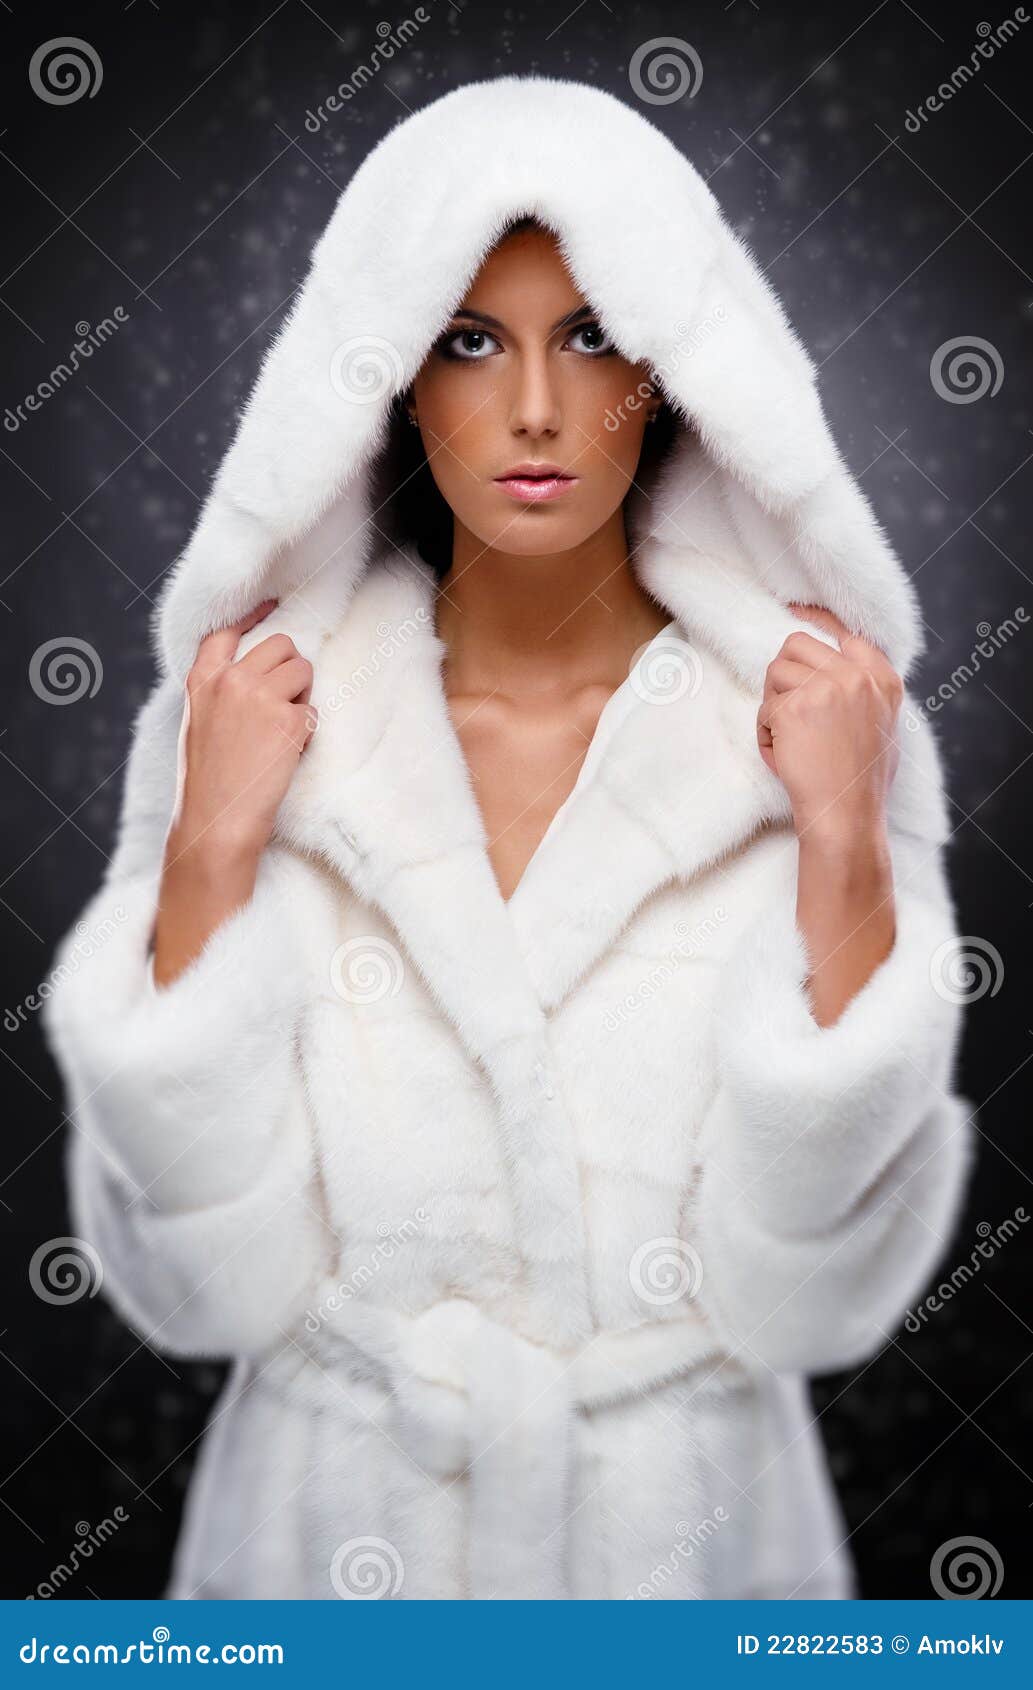 Woman in white fur coat stock image. Image of alluring - 22822583